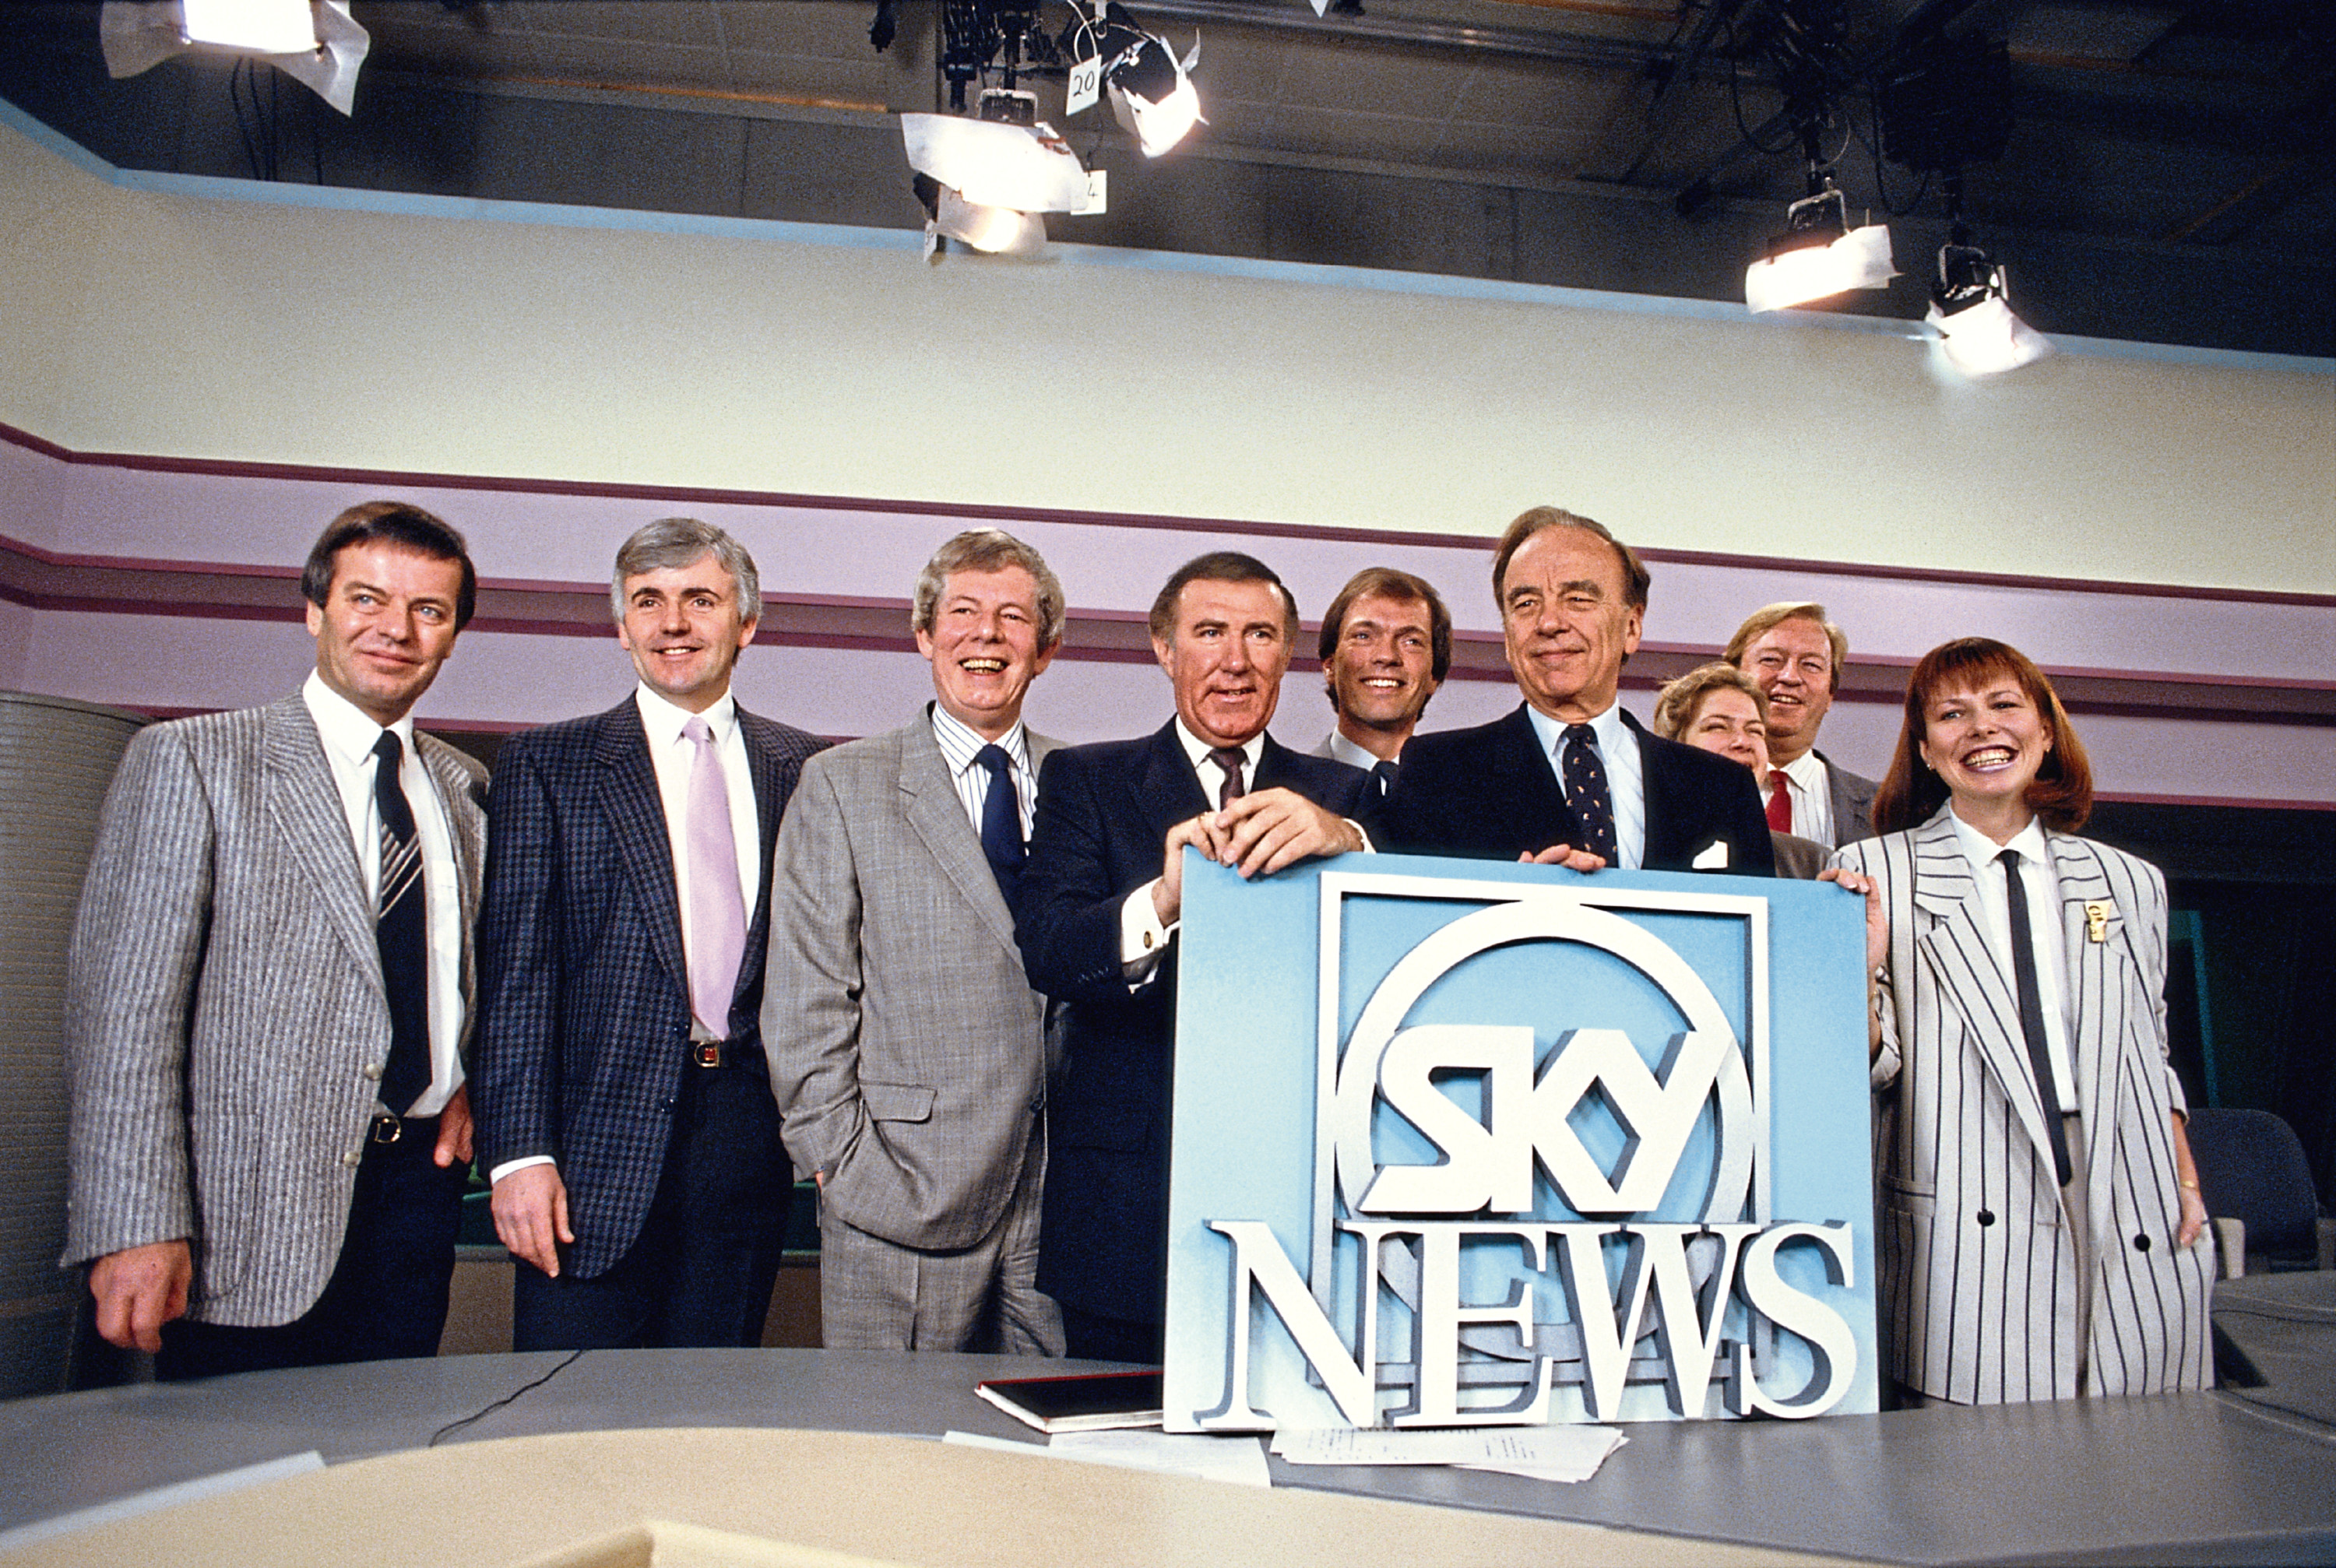 Media magnate Rupert Murdoch and broadcaster Andrew Neil at the launch of Sky TV in London, 5th February 1989. From left to right, Tony Blackburn, Peter Marshall, Derek Jameson, Neil, Alastair Yates, Murdoch, Penny Smith, Bob Friend and Kay Burley.  (Georges De Keerle/Getty Images)